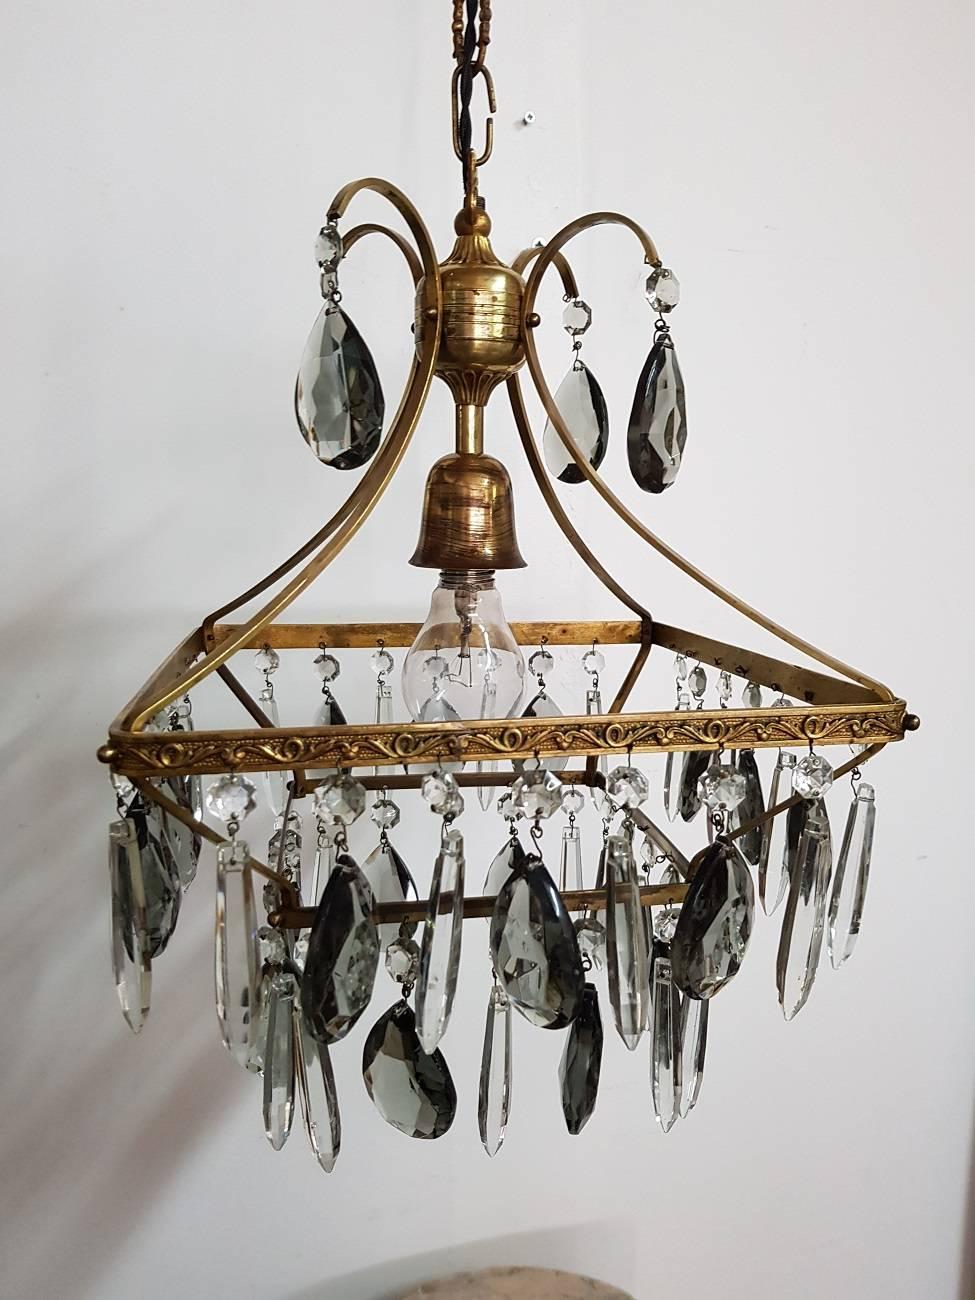 Vintage mid-20th century glass chandelier with glass prisms and decorated with relief pattern of curls in the frame. It is in a good condition with new vintage wire and all the pegs have been cleaned of which have a few small chips.

The